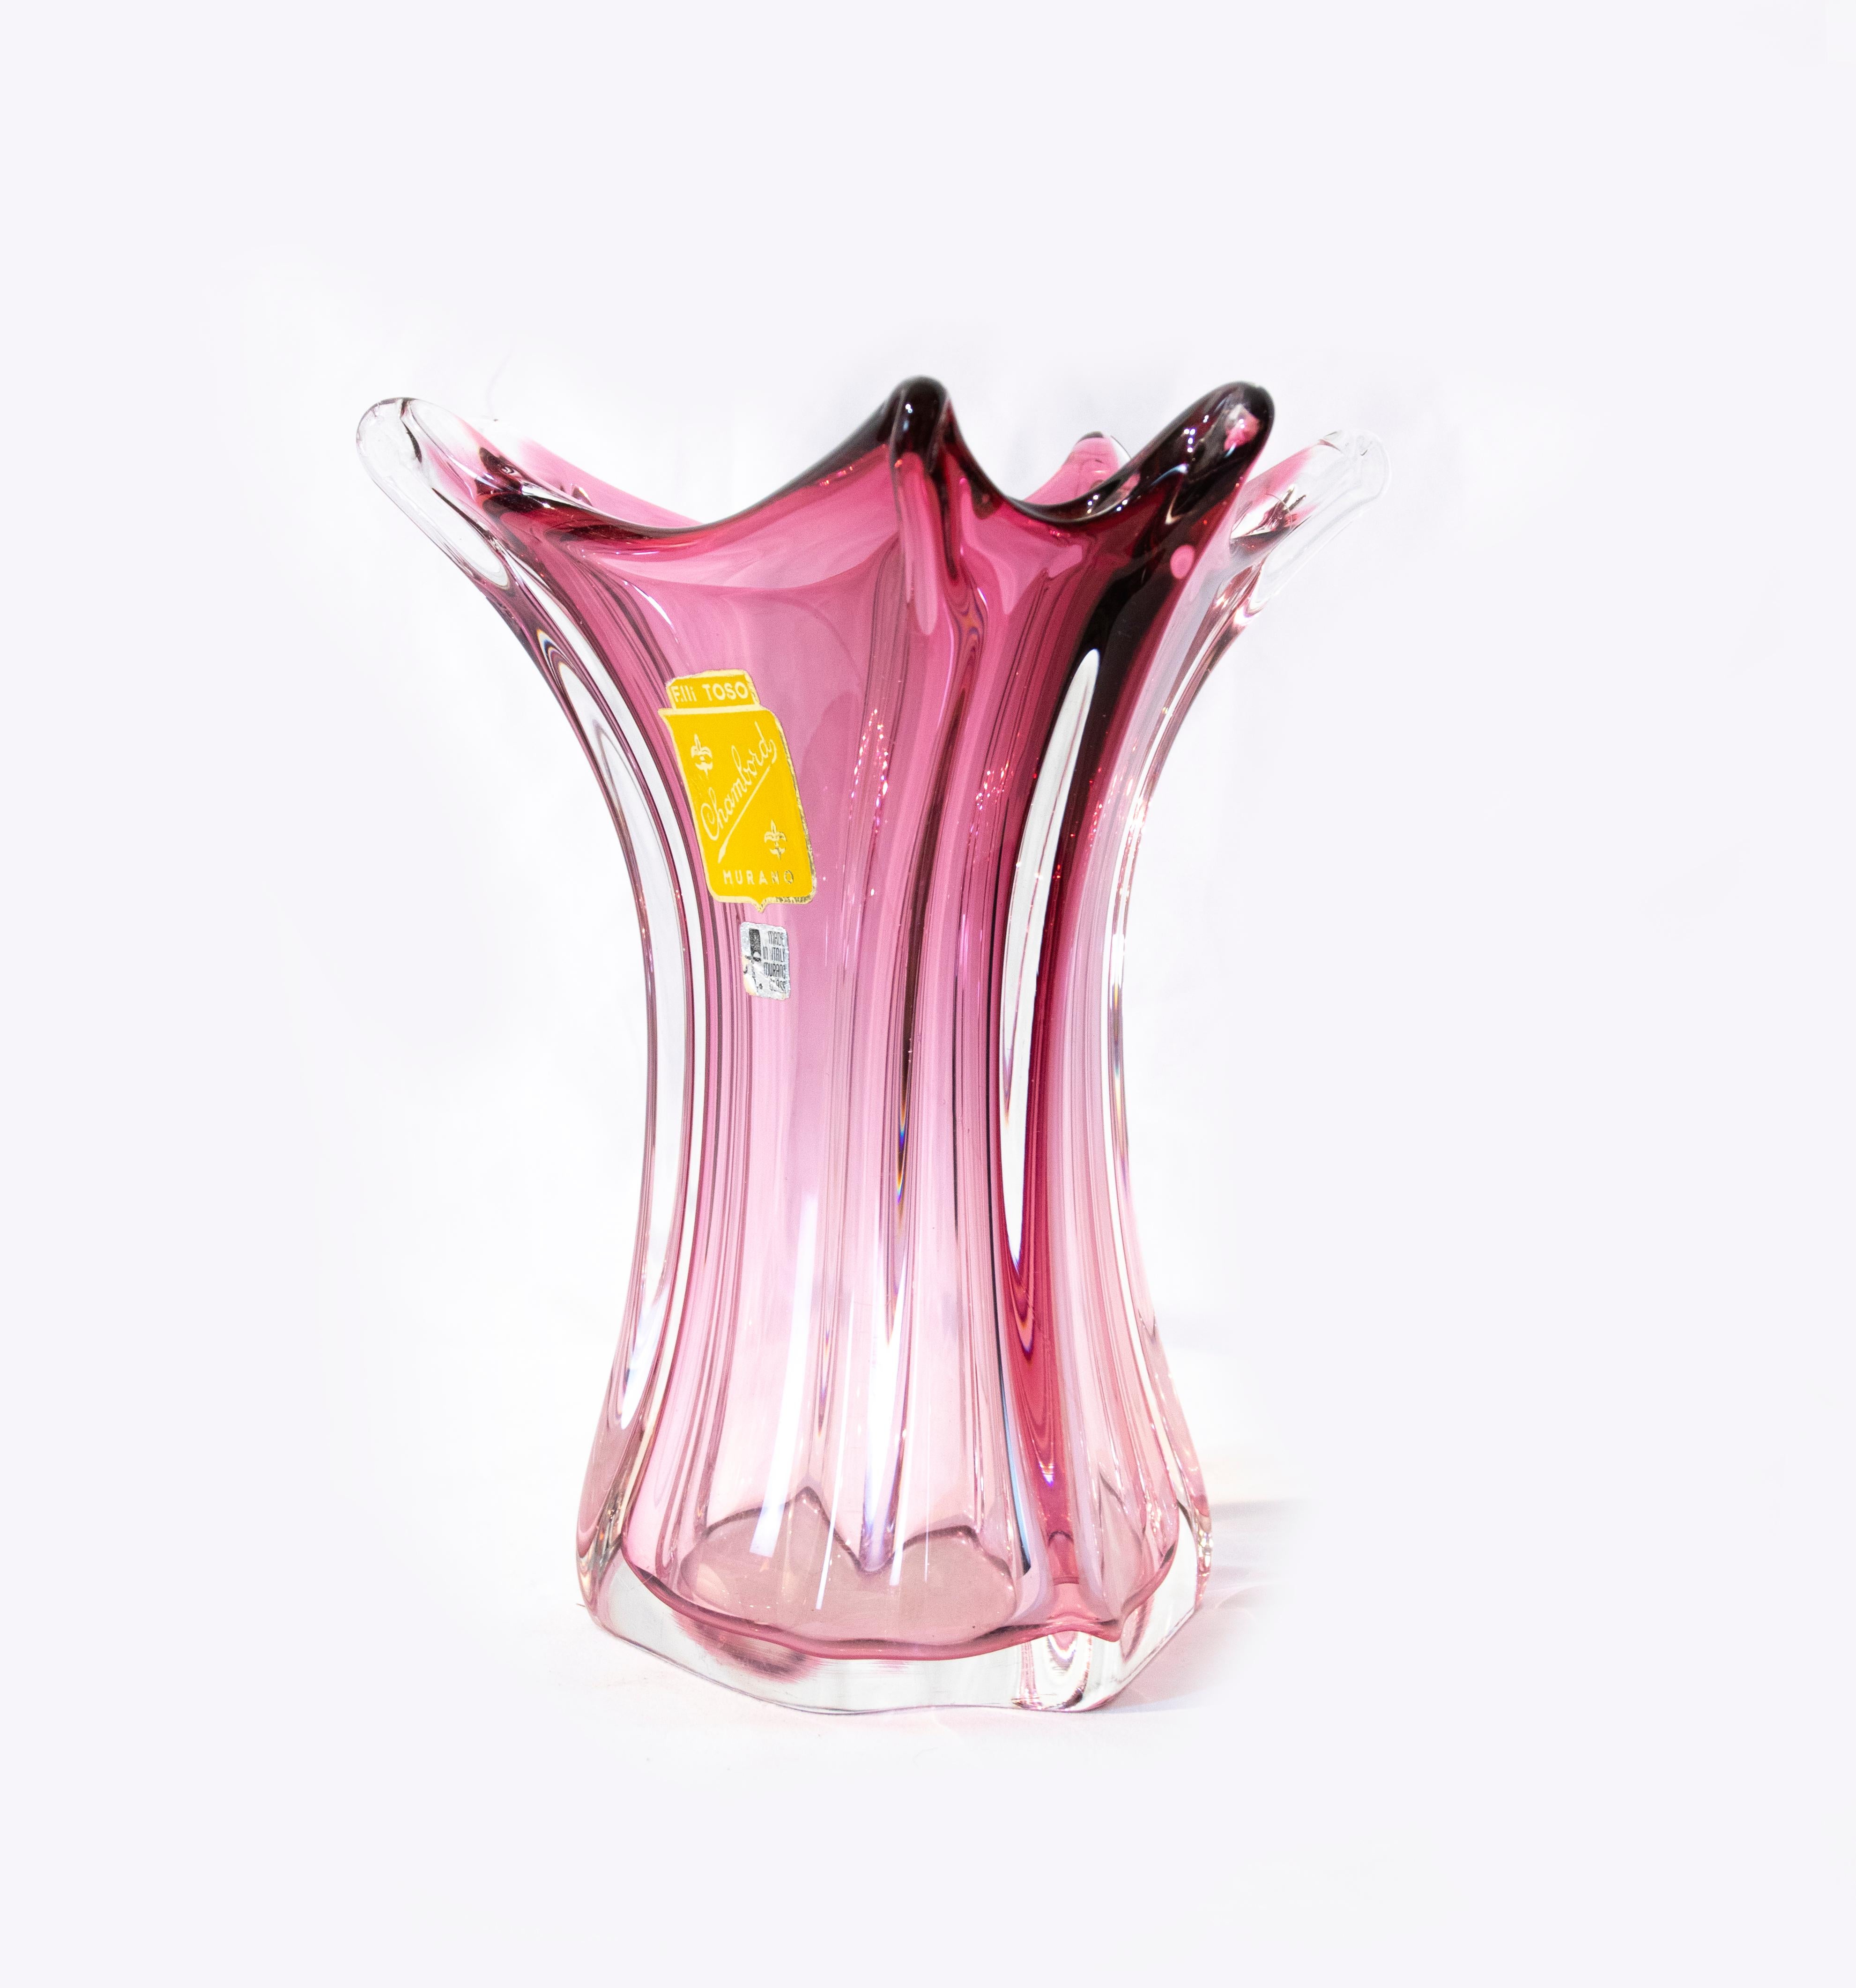 Glass vase Chambord is a pink colored vase realized by Fratelli Toso in the 1940s.

Good conditions.

Murano glass

This huge, heavy and stylish Italian glass vase is in intense pink with clear glass, it retains the original Chambord Toso line